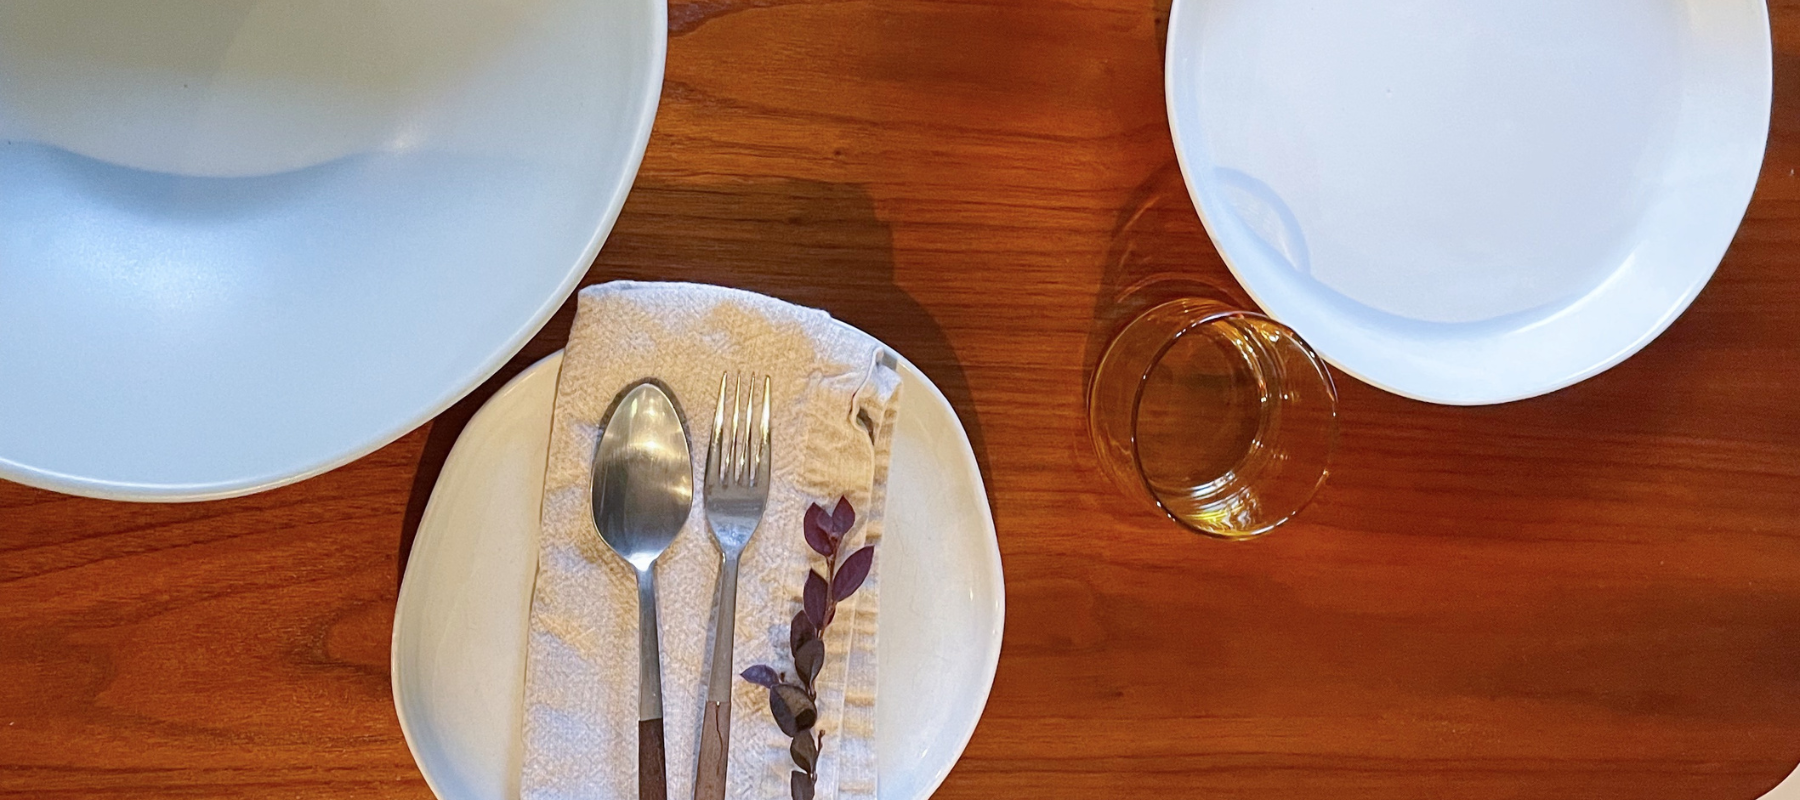 plates arranged on the table and cutlery